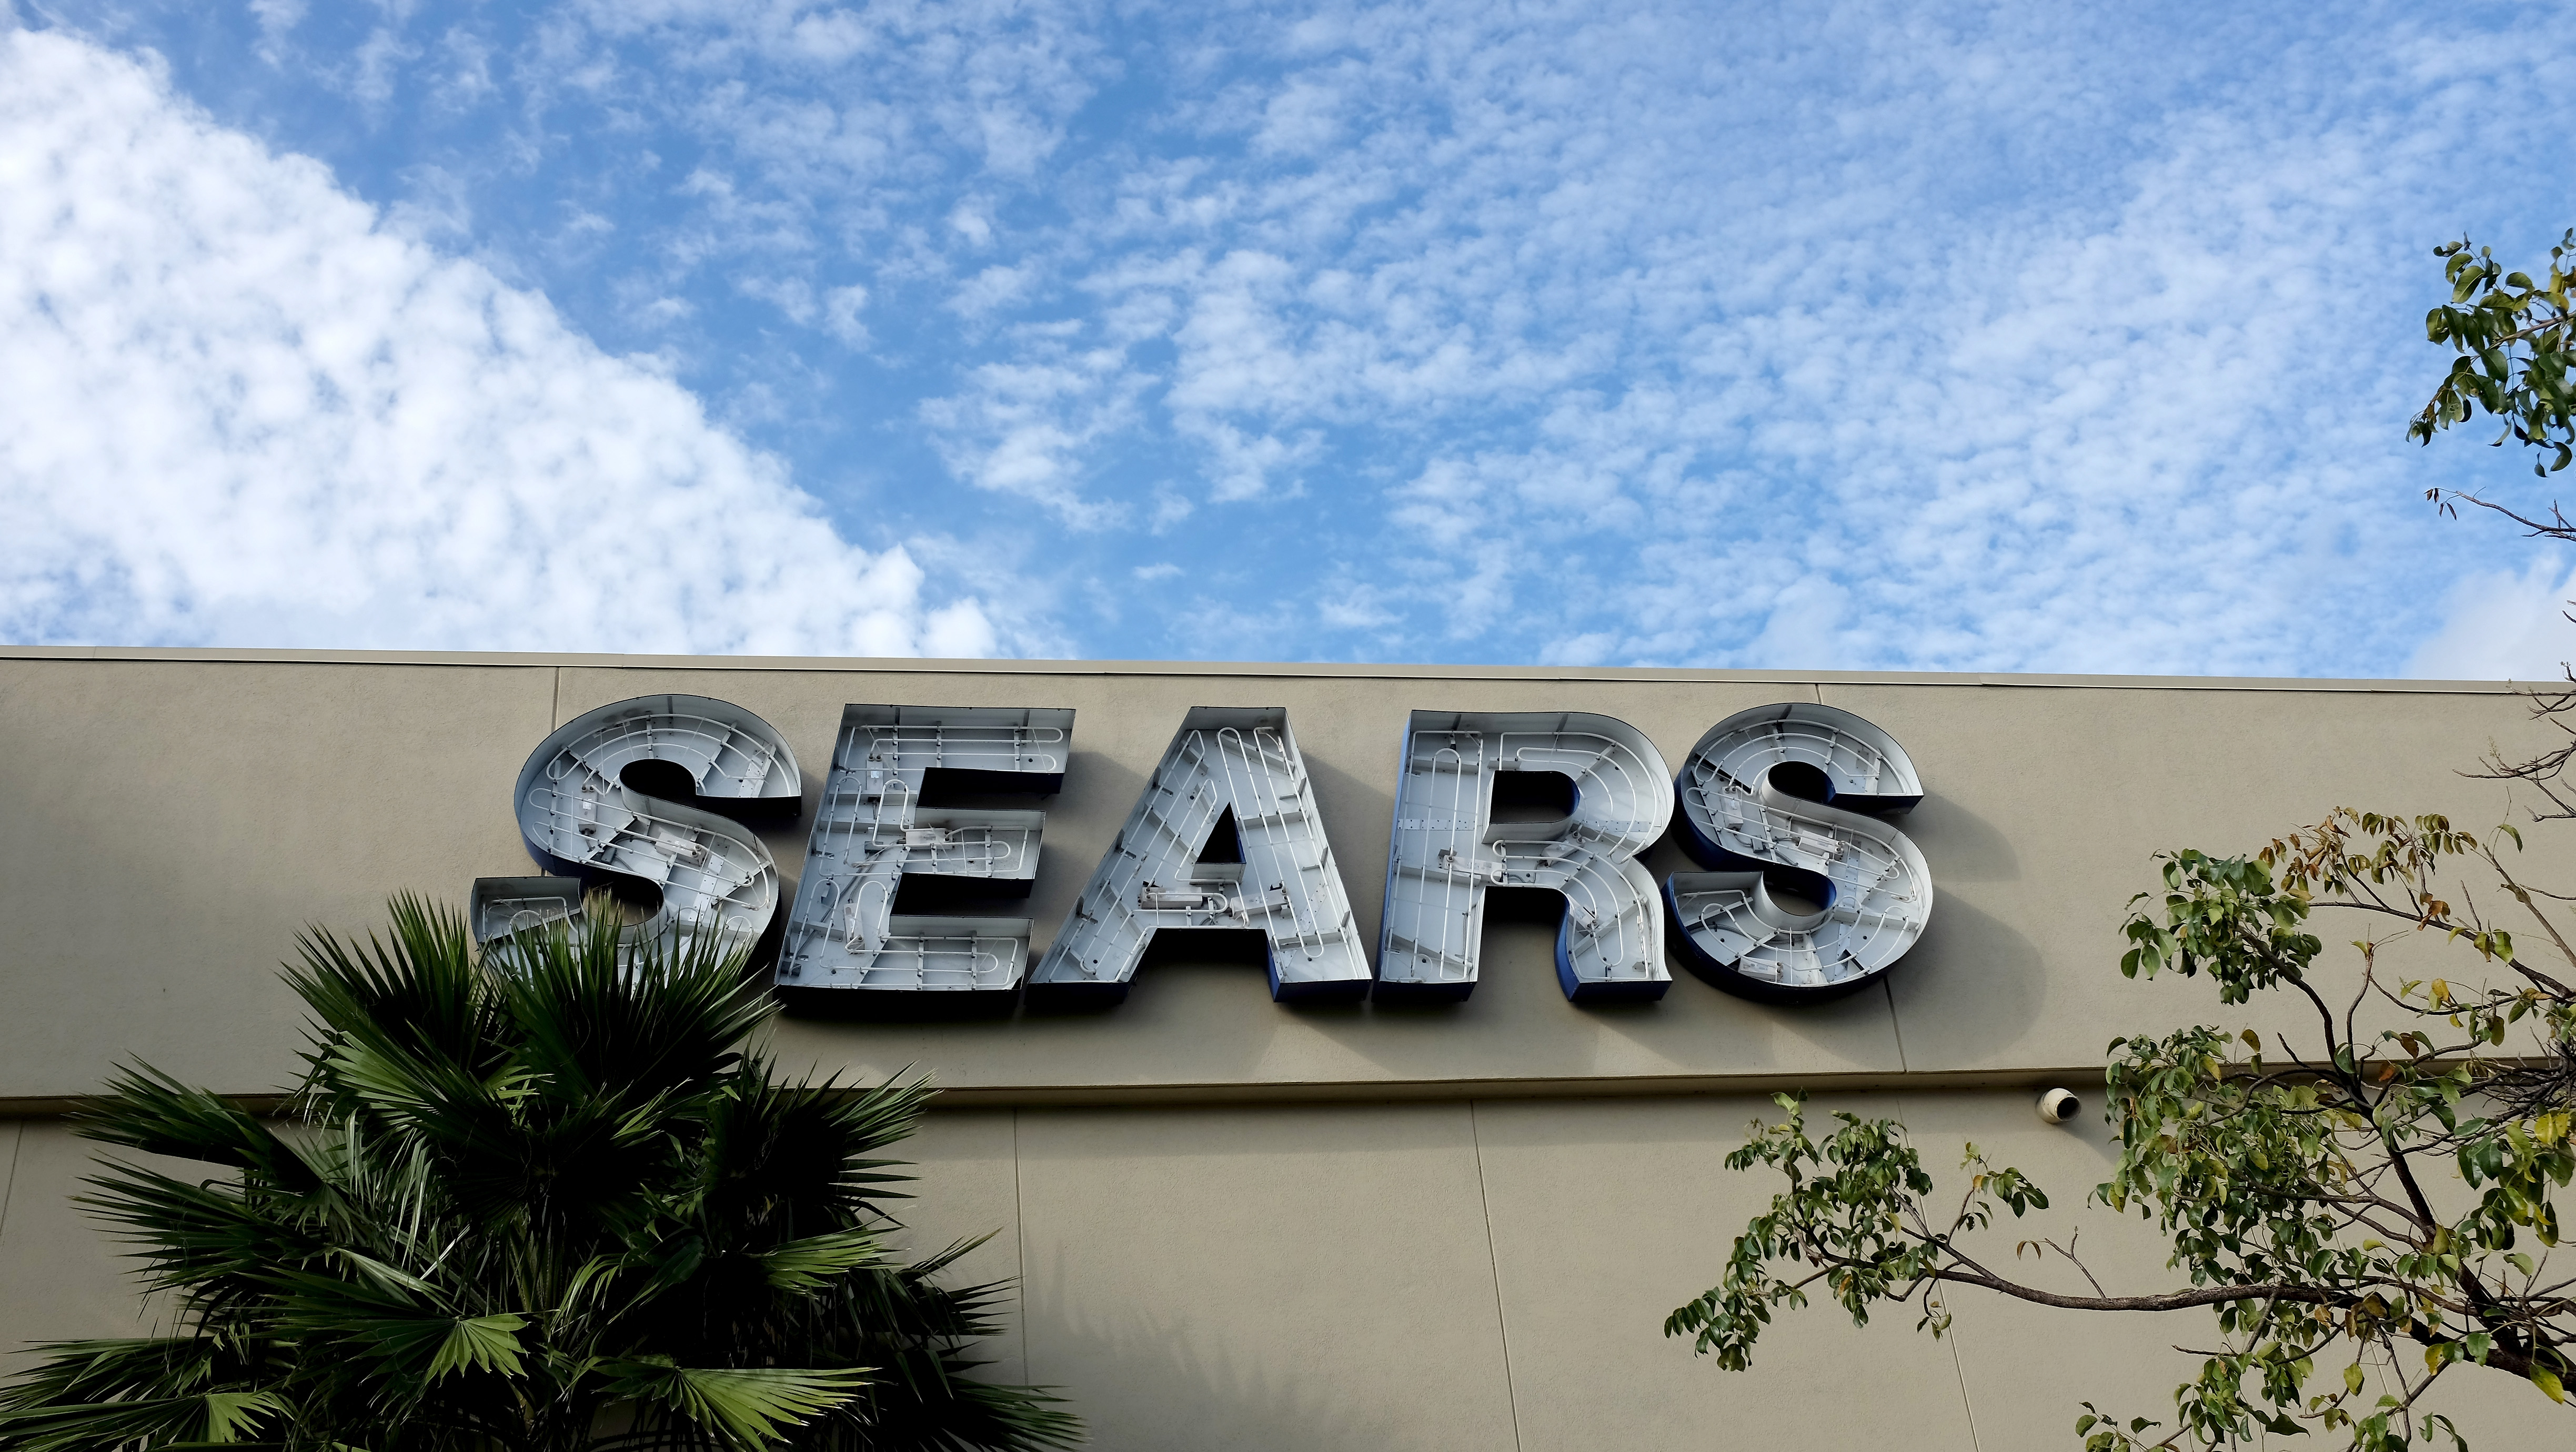 In the most recent quarter Sears lost over $740 million.